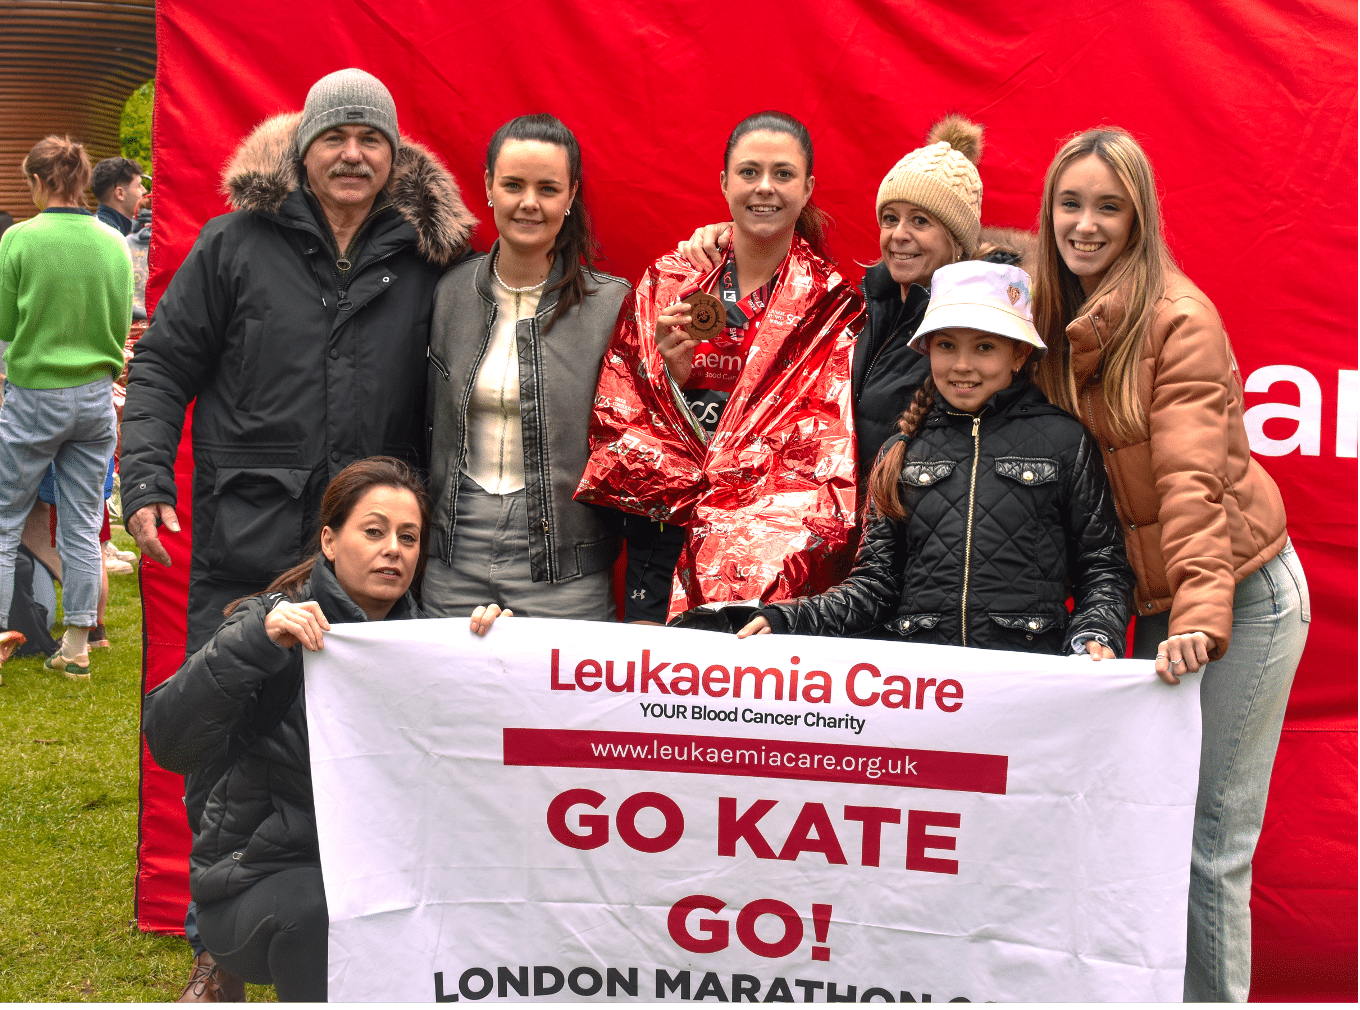 The image shows Leukaemia Care supporters holding a custom sign at London Marathon that says Go Kate.